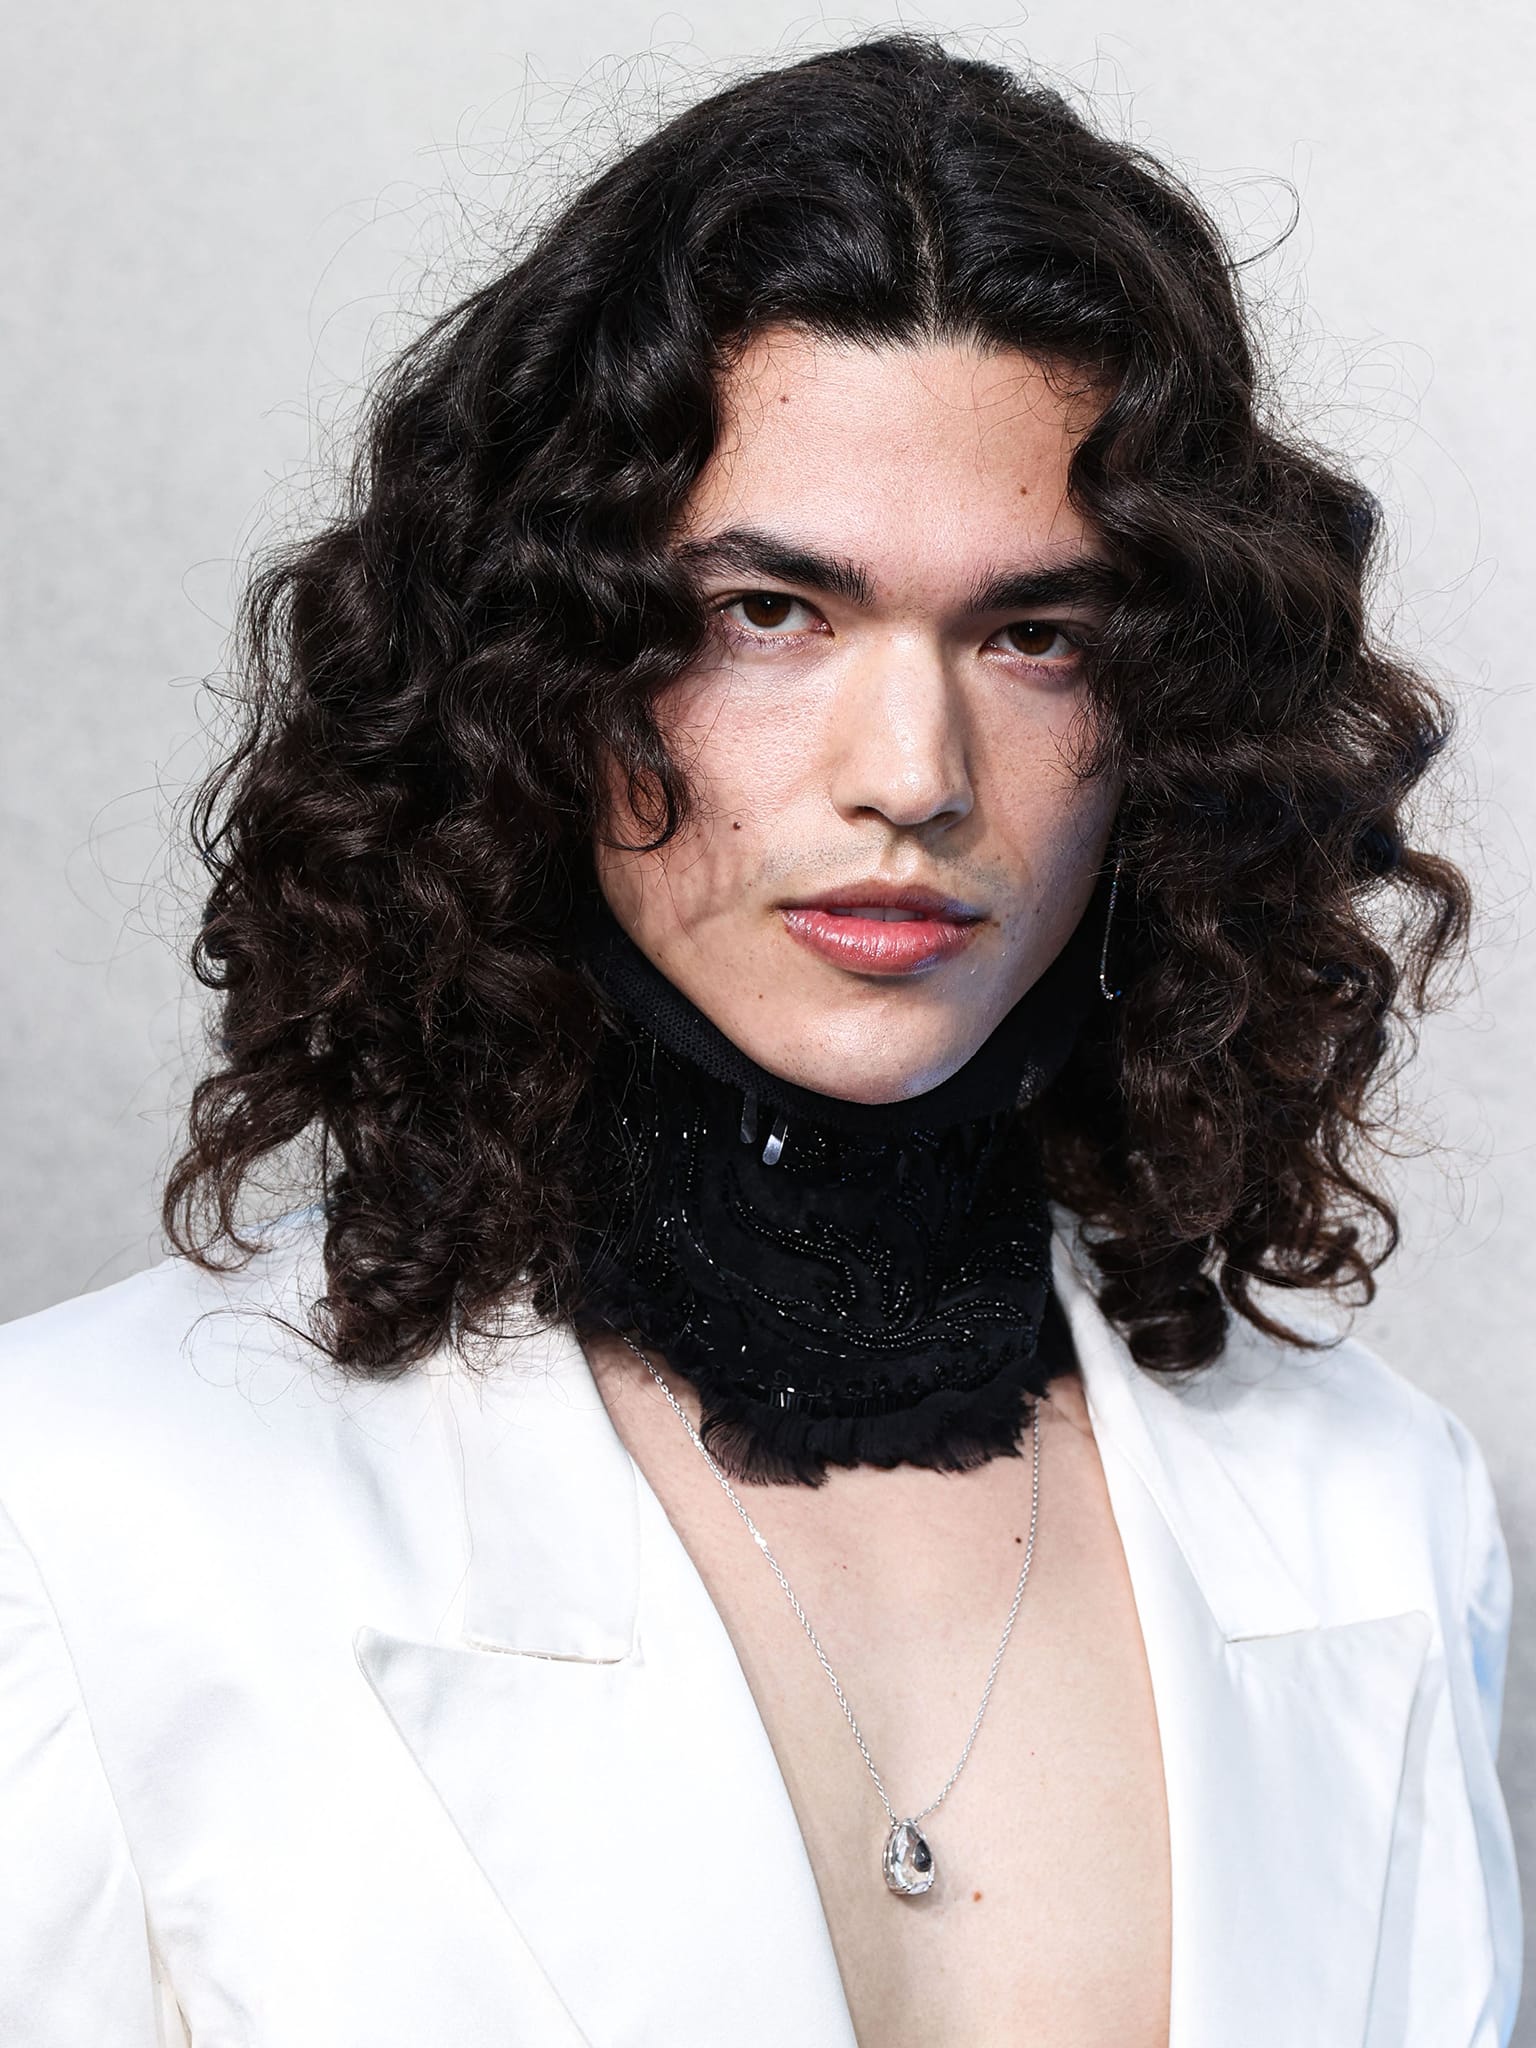 Conan Gray wears his natural curls and styles his look with a Dries Van Noten neckpiece